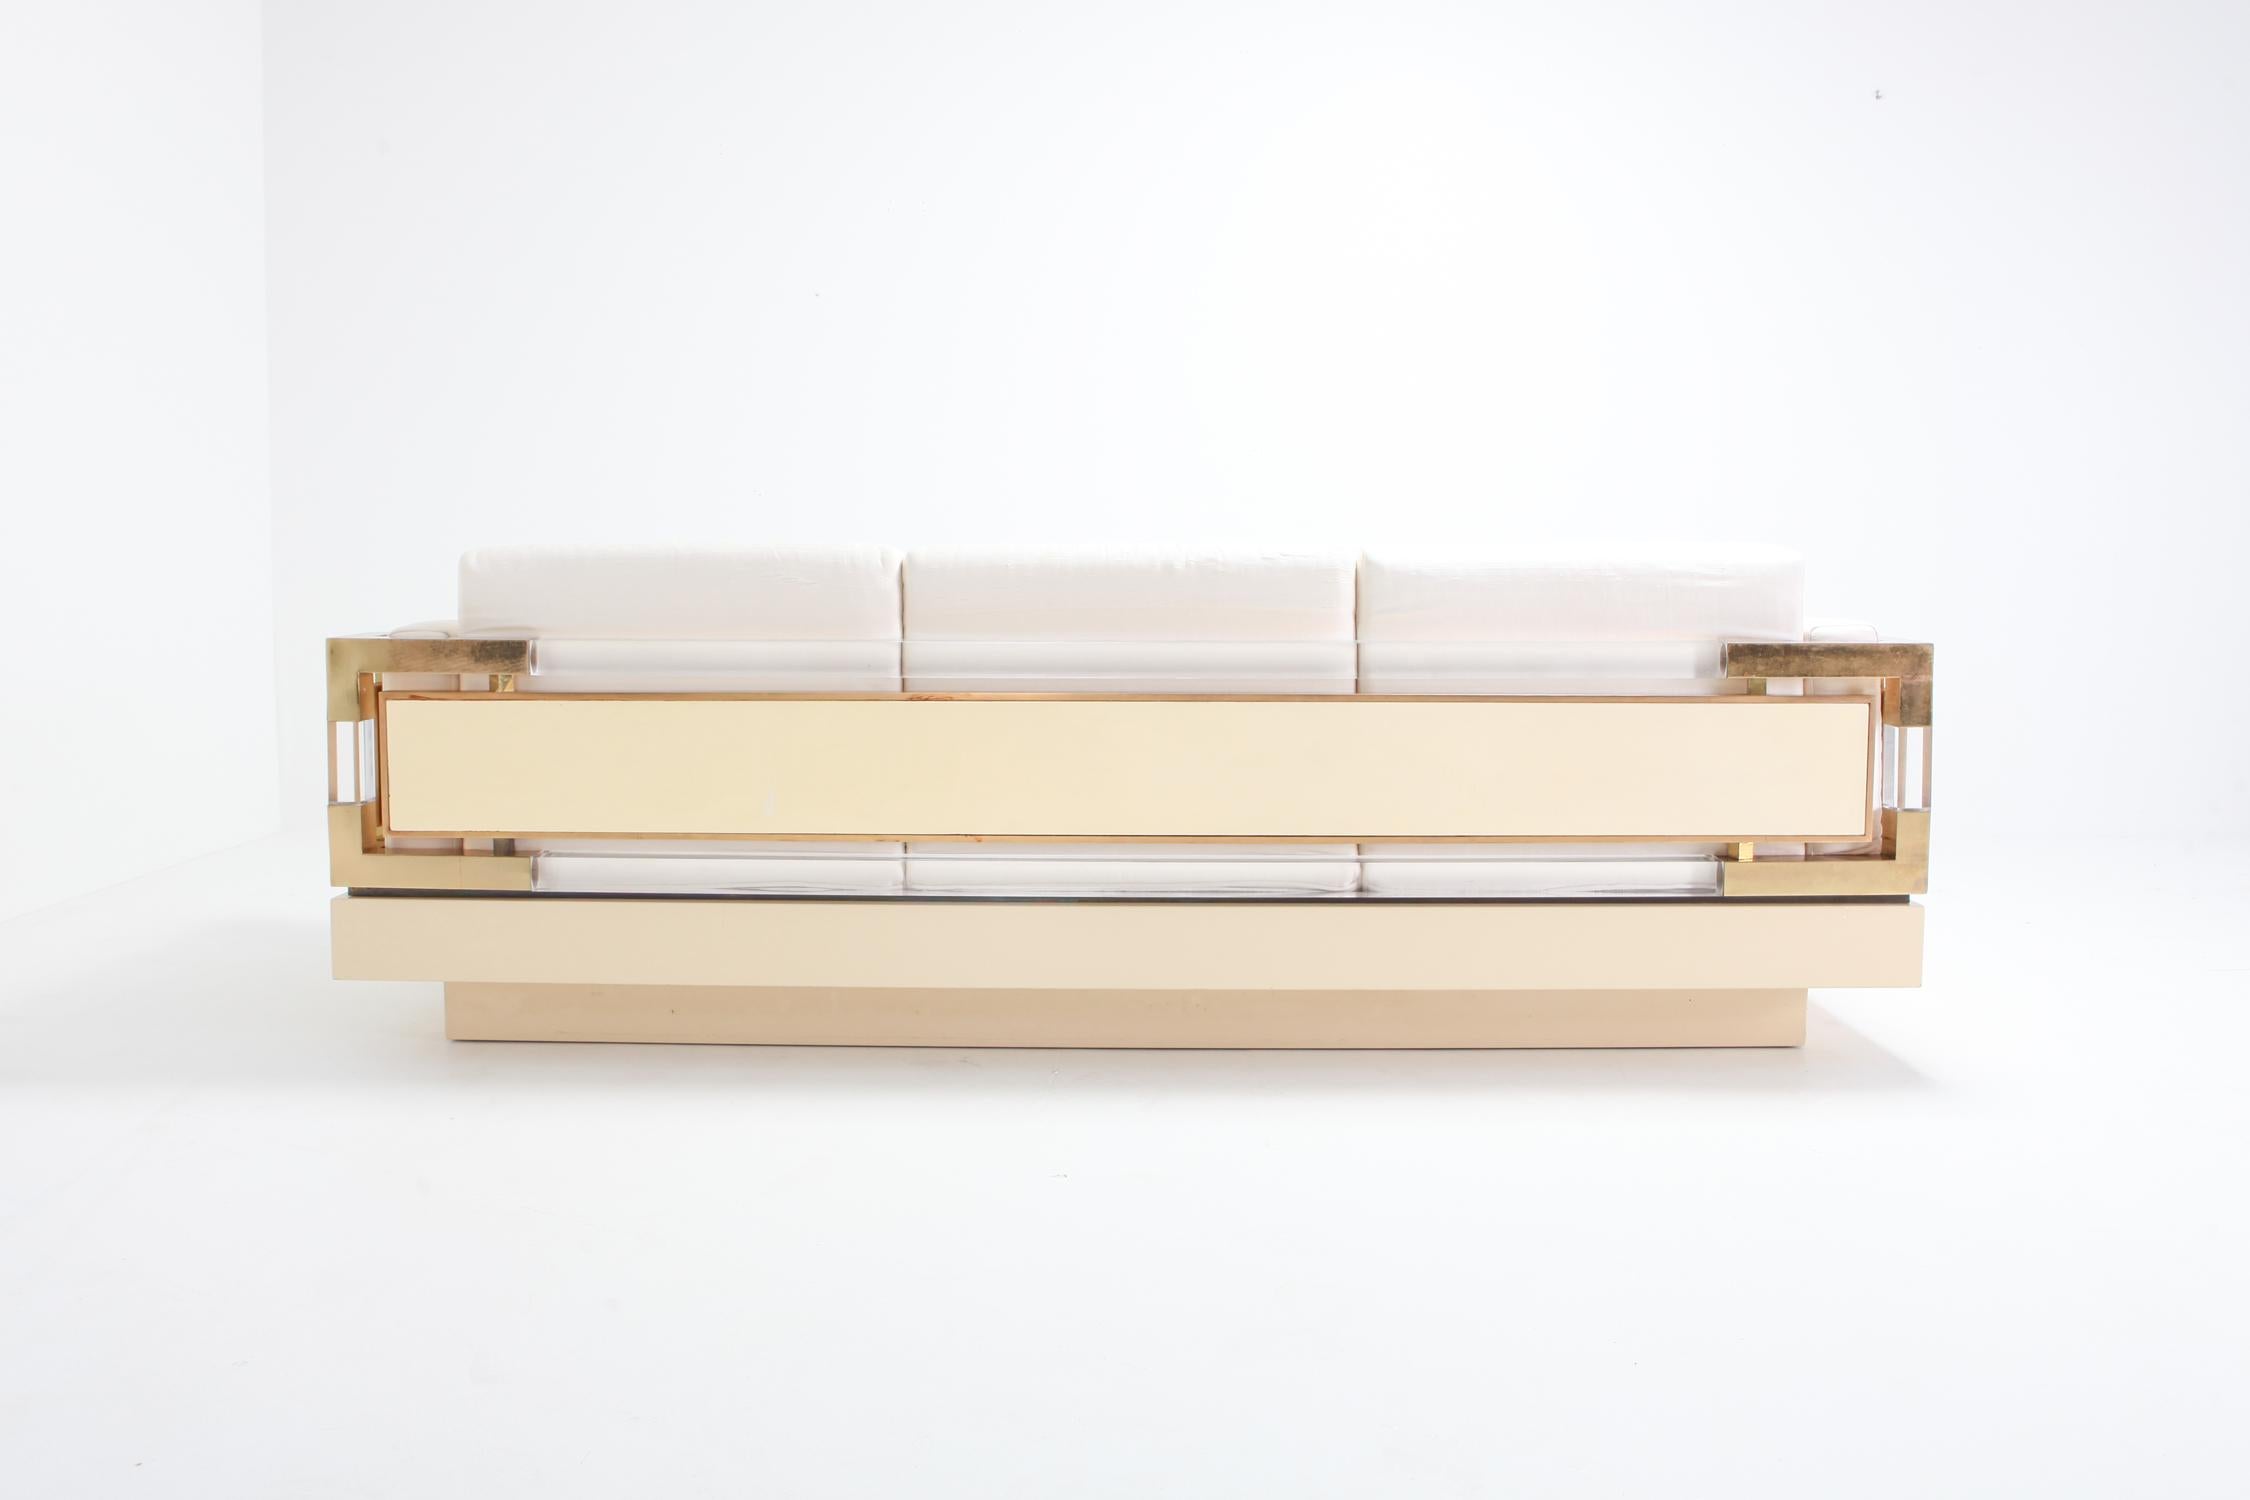 20th Century Hollywood Regency Couch in Cream Lacquer, Brass and Lucite, 1970s